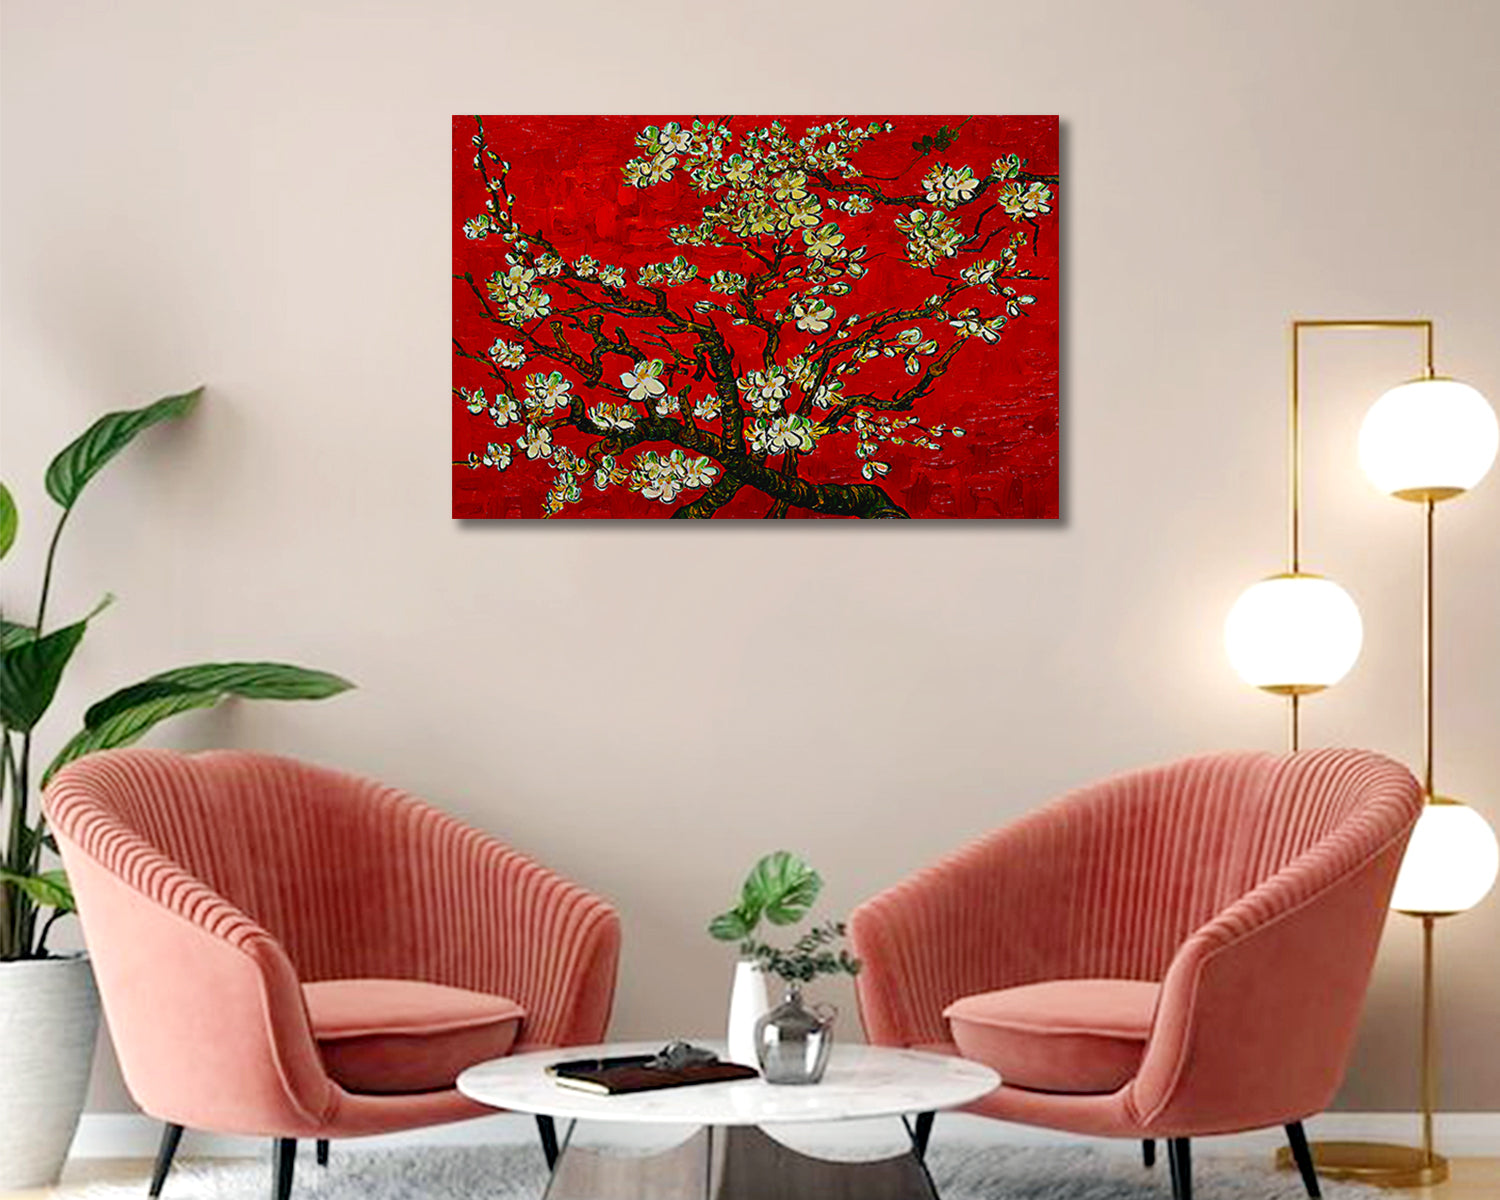 Japanese Maple Tree - Unframed Canvas Painting